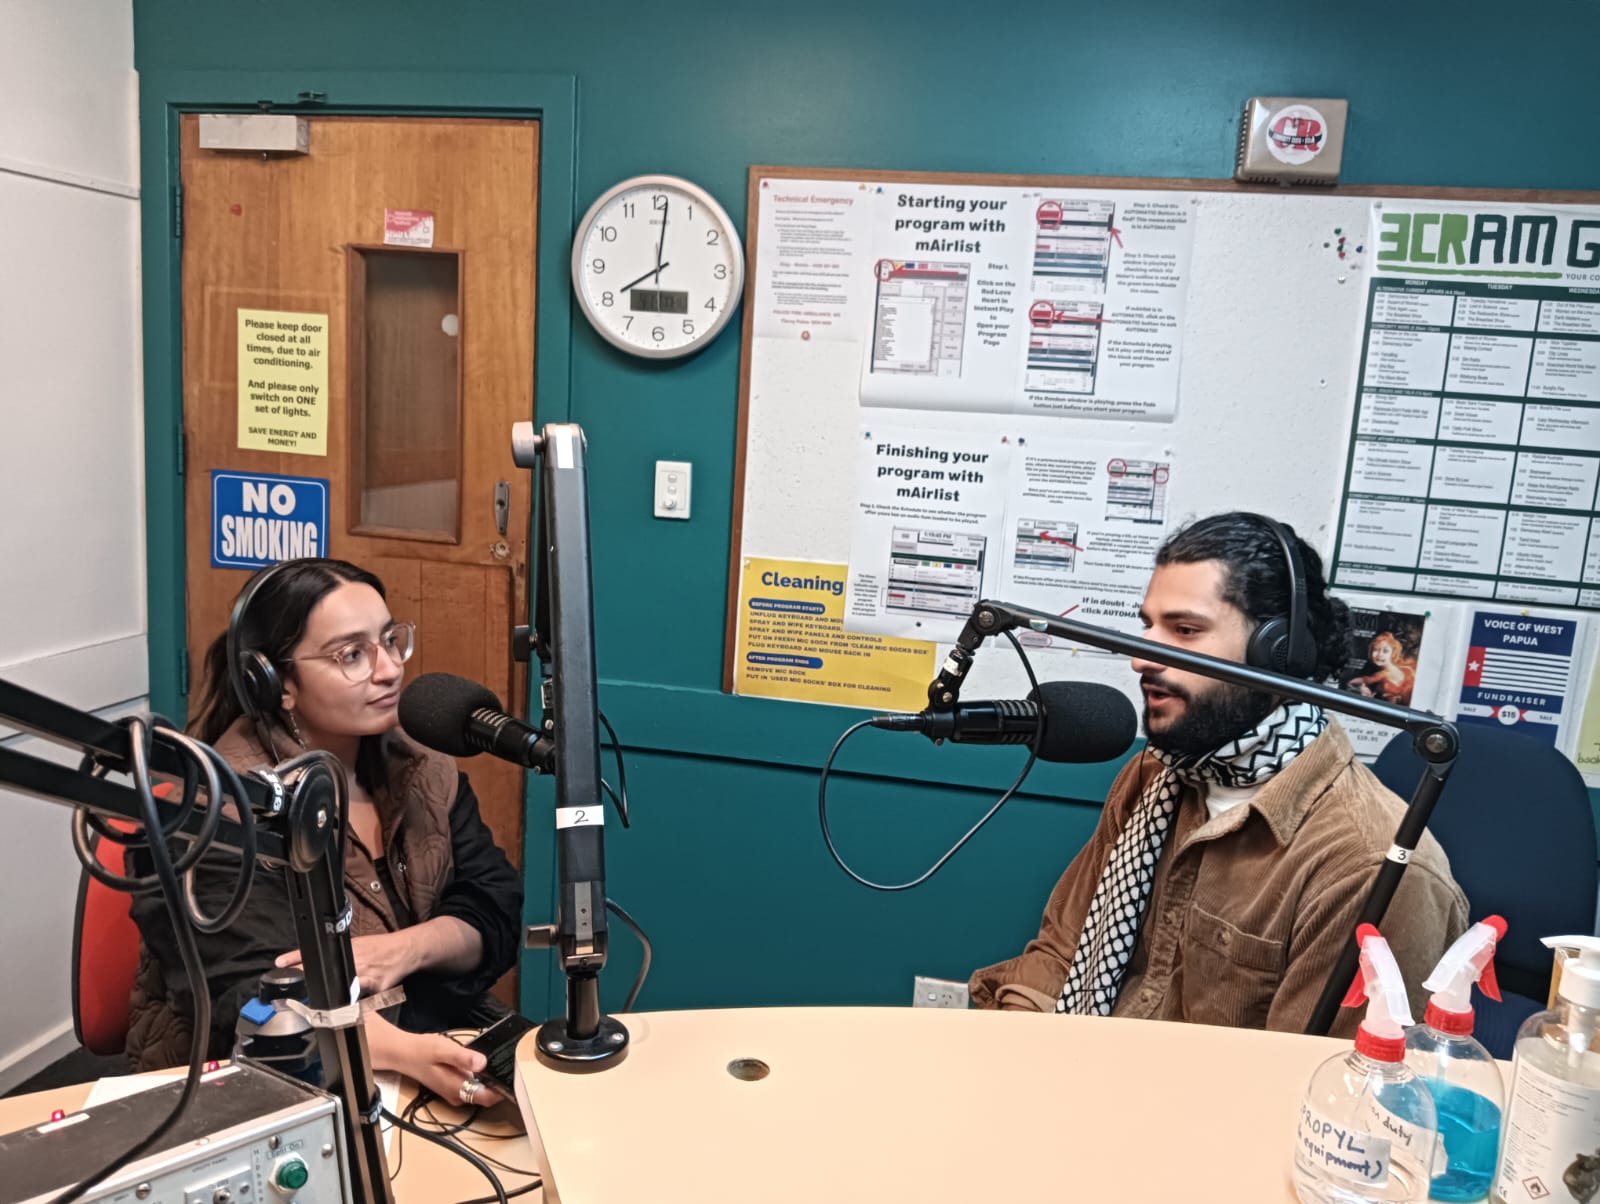 A photograph of Inez Winters and Ahmed Barakat in the 3CR studio.